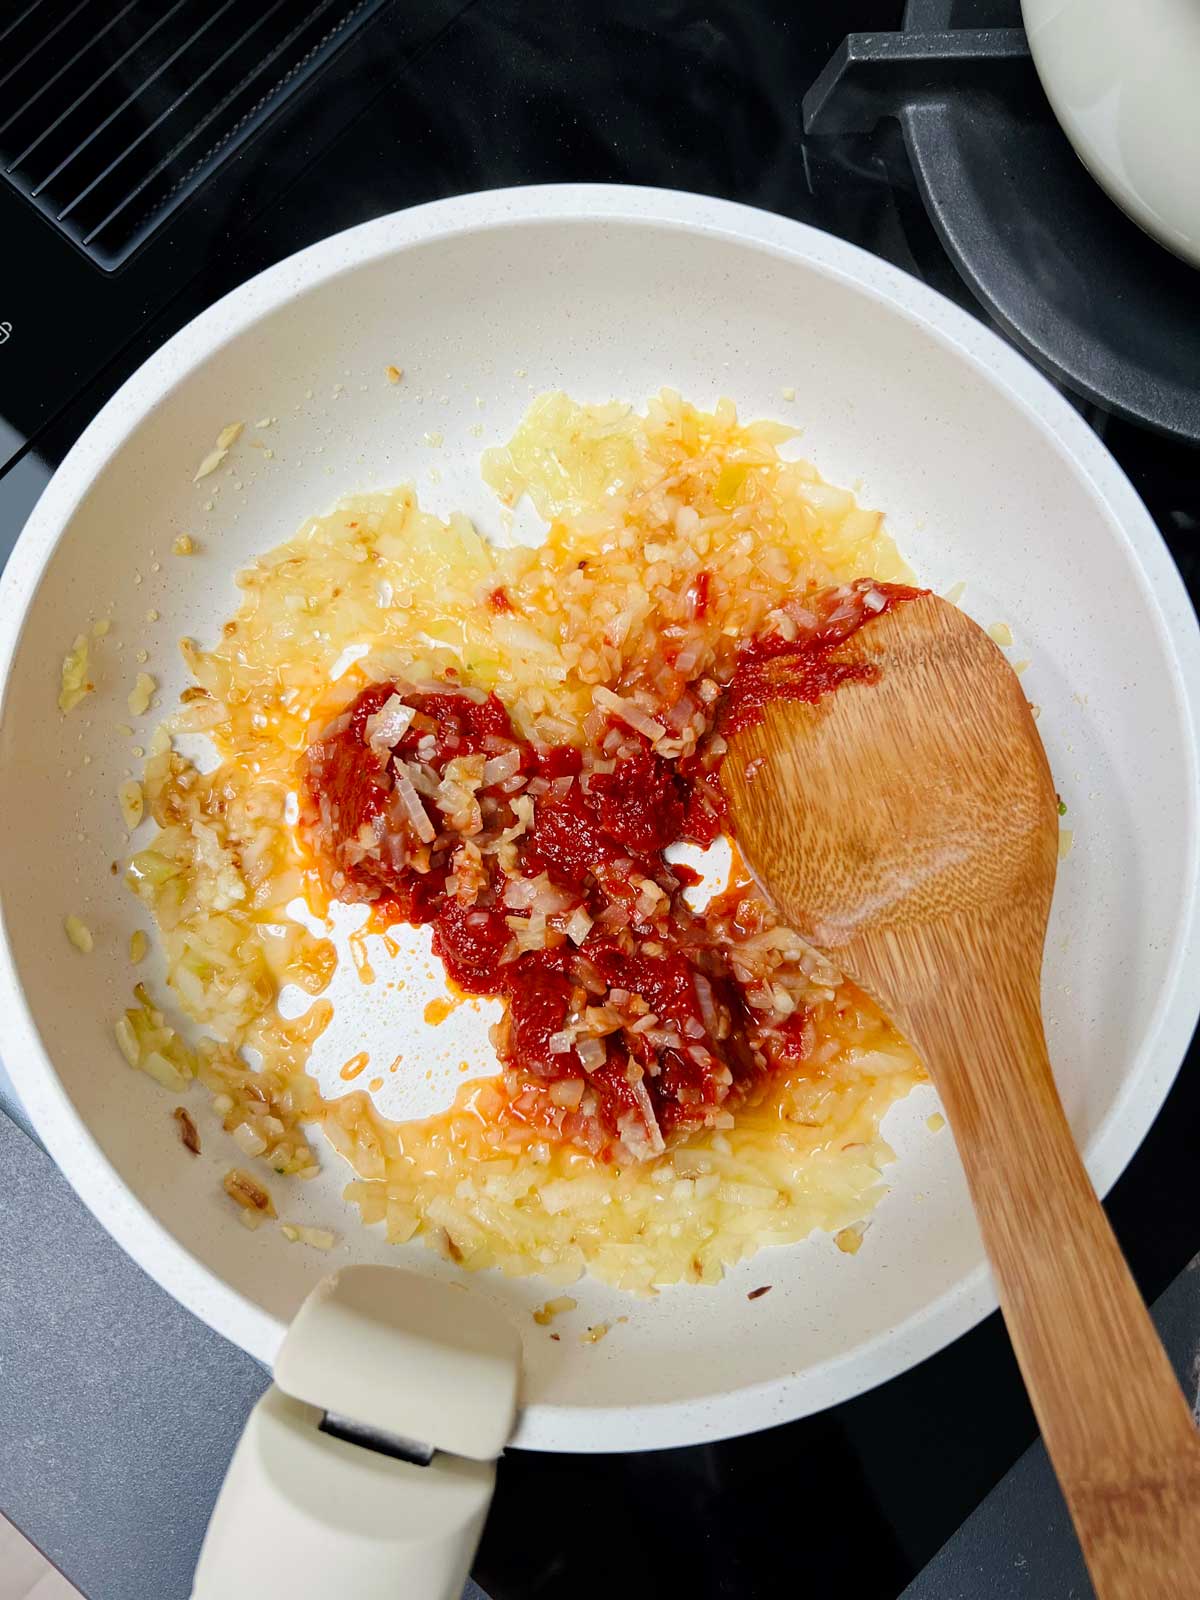 Onion, tomato and pepper paste mix cooking in a white pan with wooden spatula in.